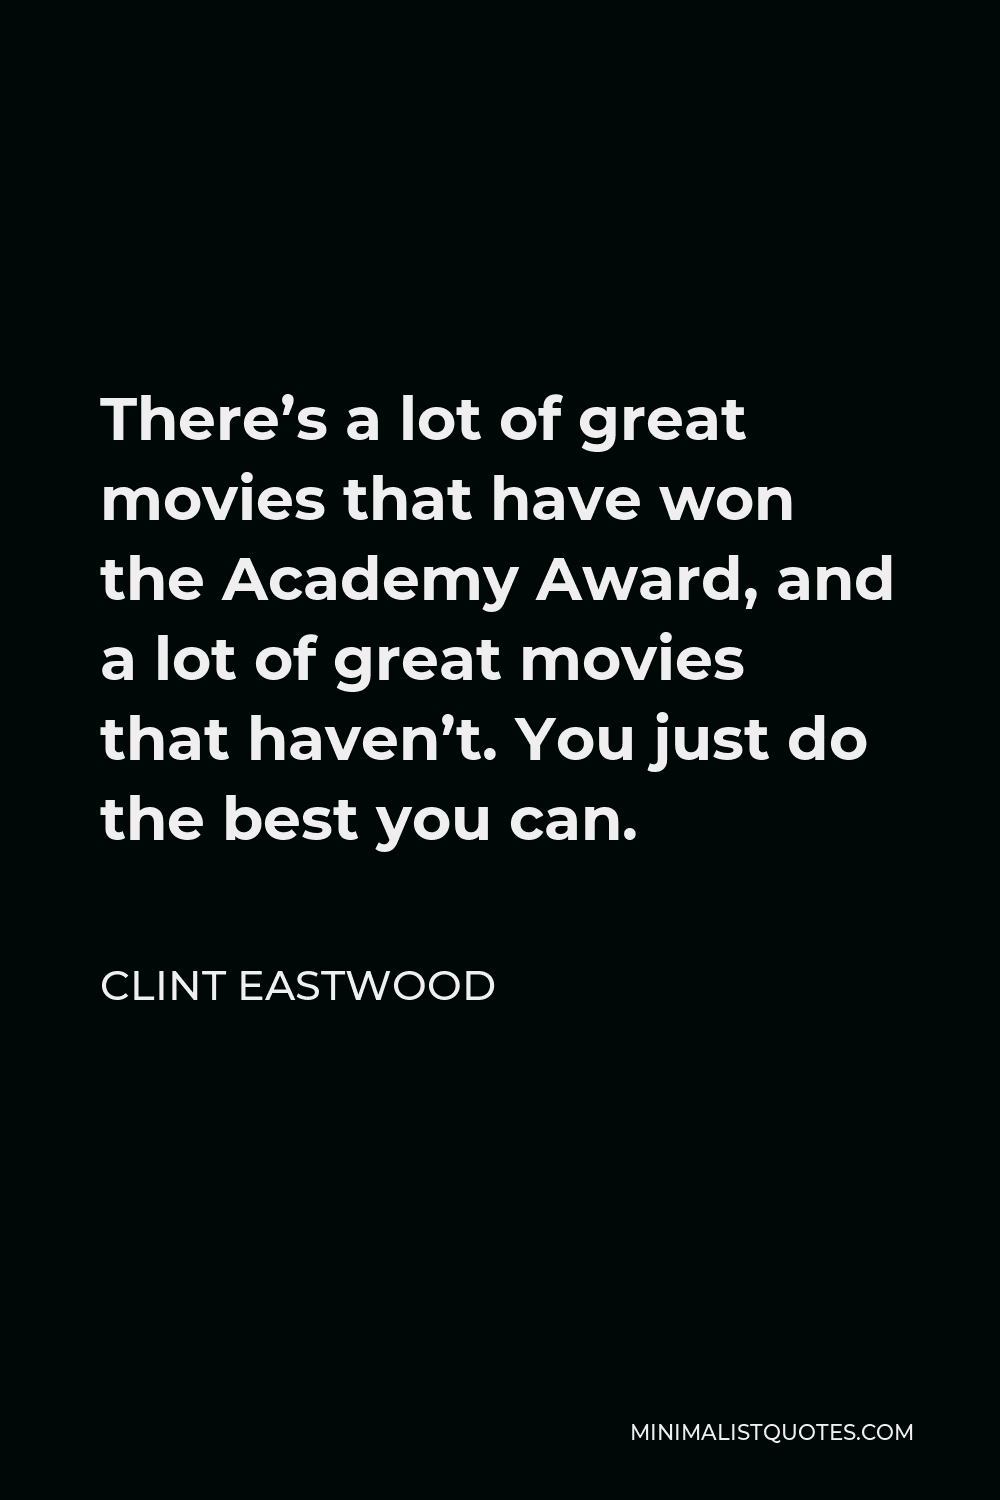 Clint Eastwood Quote - There’s a lot of great movies that have won the Academy Award, and a lot of great movies that haven’t. You just do the best you can.